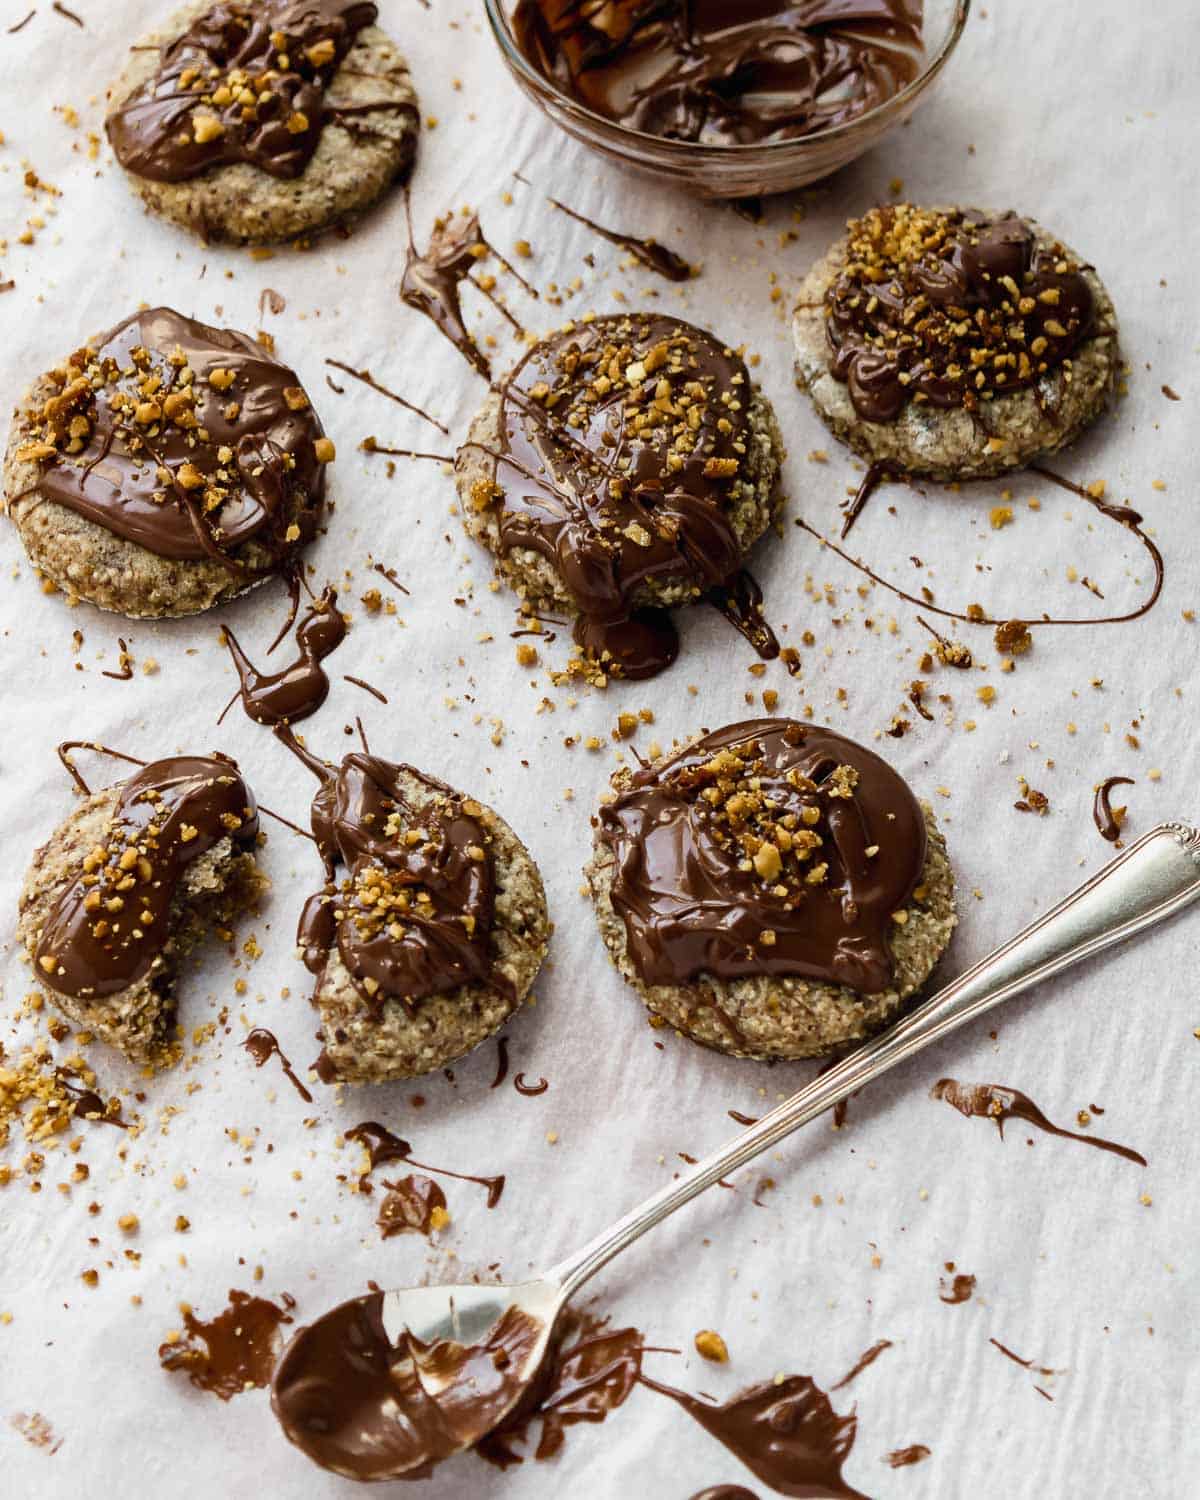 Nutella-Hazelnut-Cookies-one-bite-a-spoon-and-bowl-of-nutella